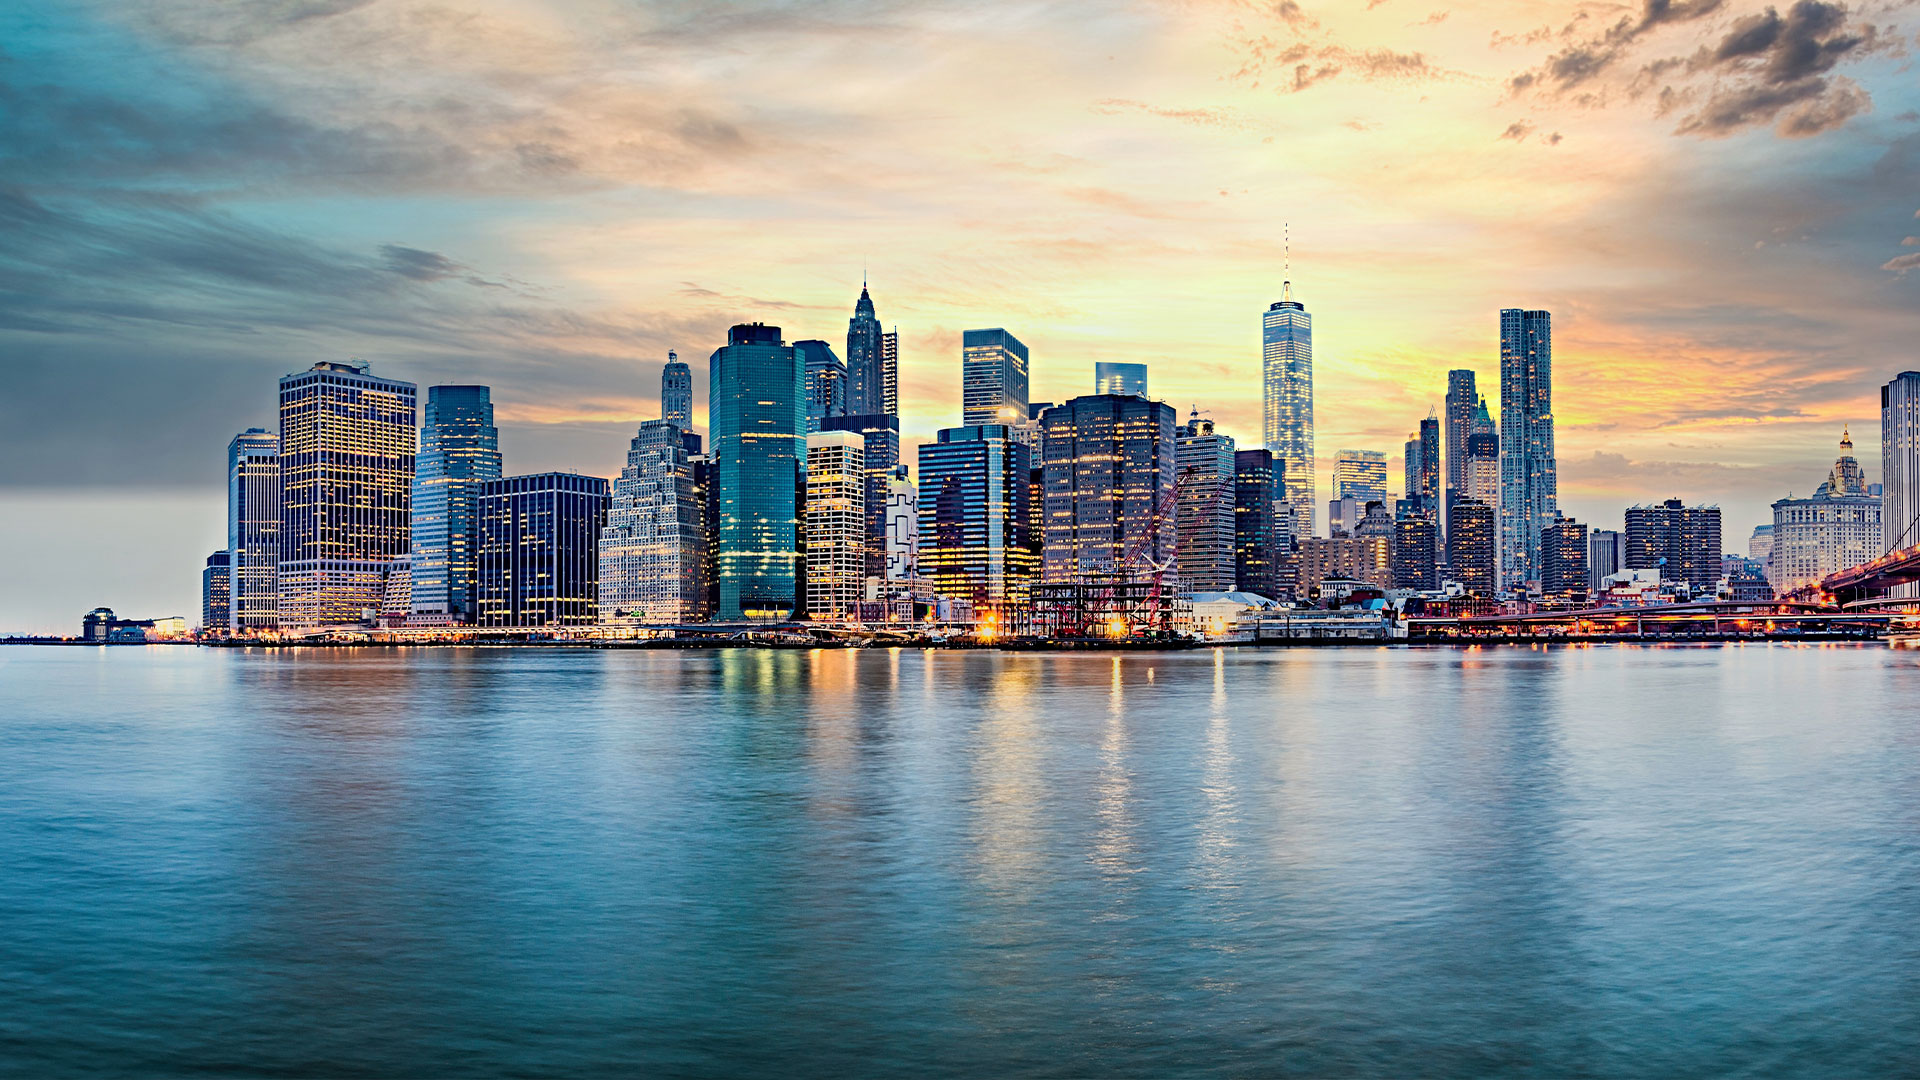 The image depicts a city skyline with the Manhattan skyline in the background and a calm river reflecting the buildings. It is a photograph taken during what appears to be either sunrise or sunset, given the warm lighting.